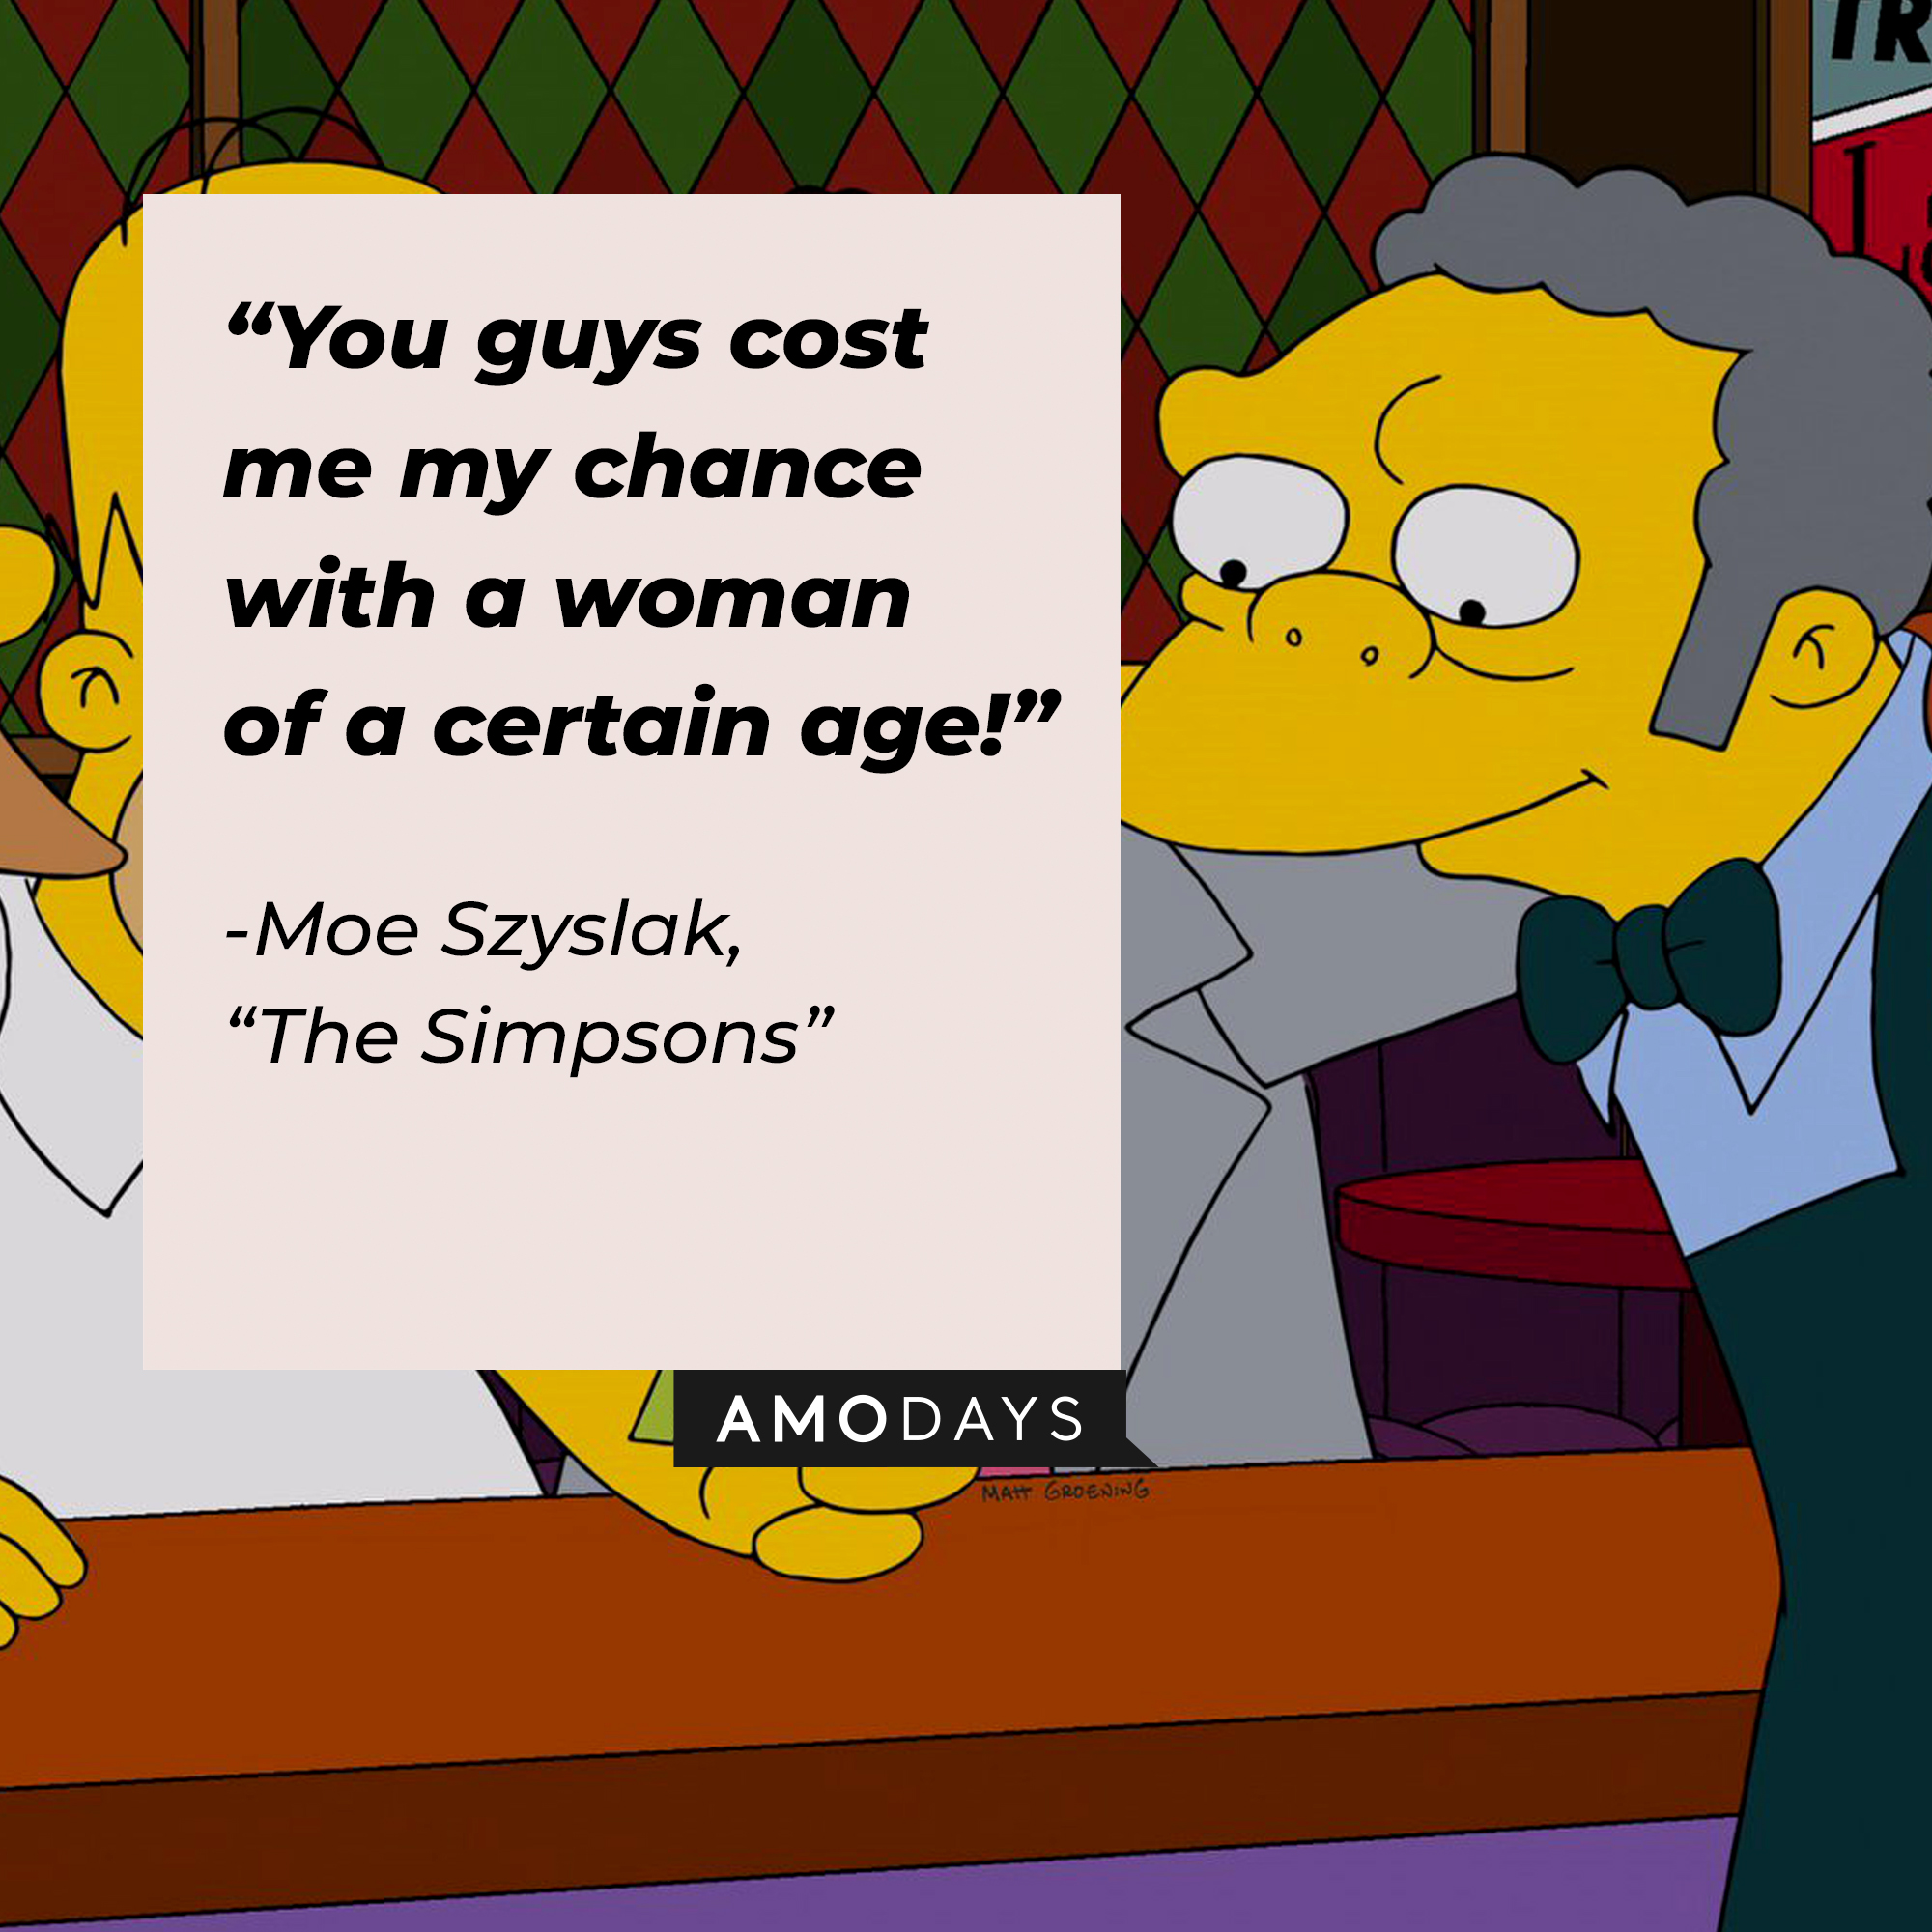 Image of Moe Szyslak with his quote from "The Simpsons:" “You guys cost me my chance with a woman of a certain age!” | Source: Facebook.com/TheSimpsons